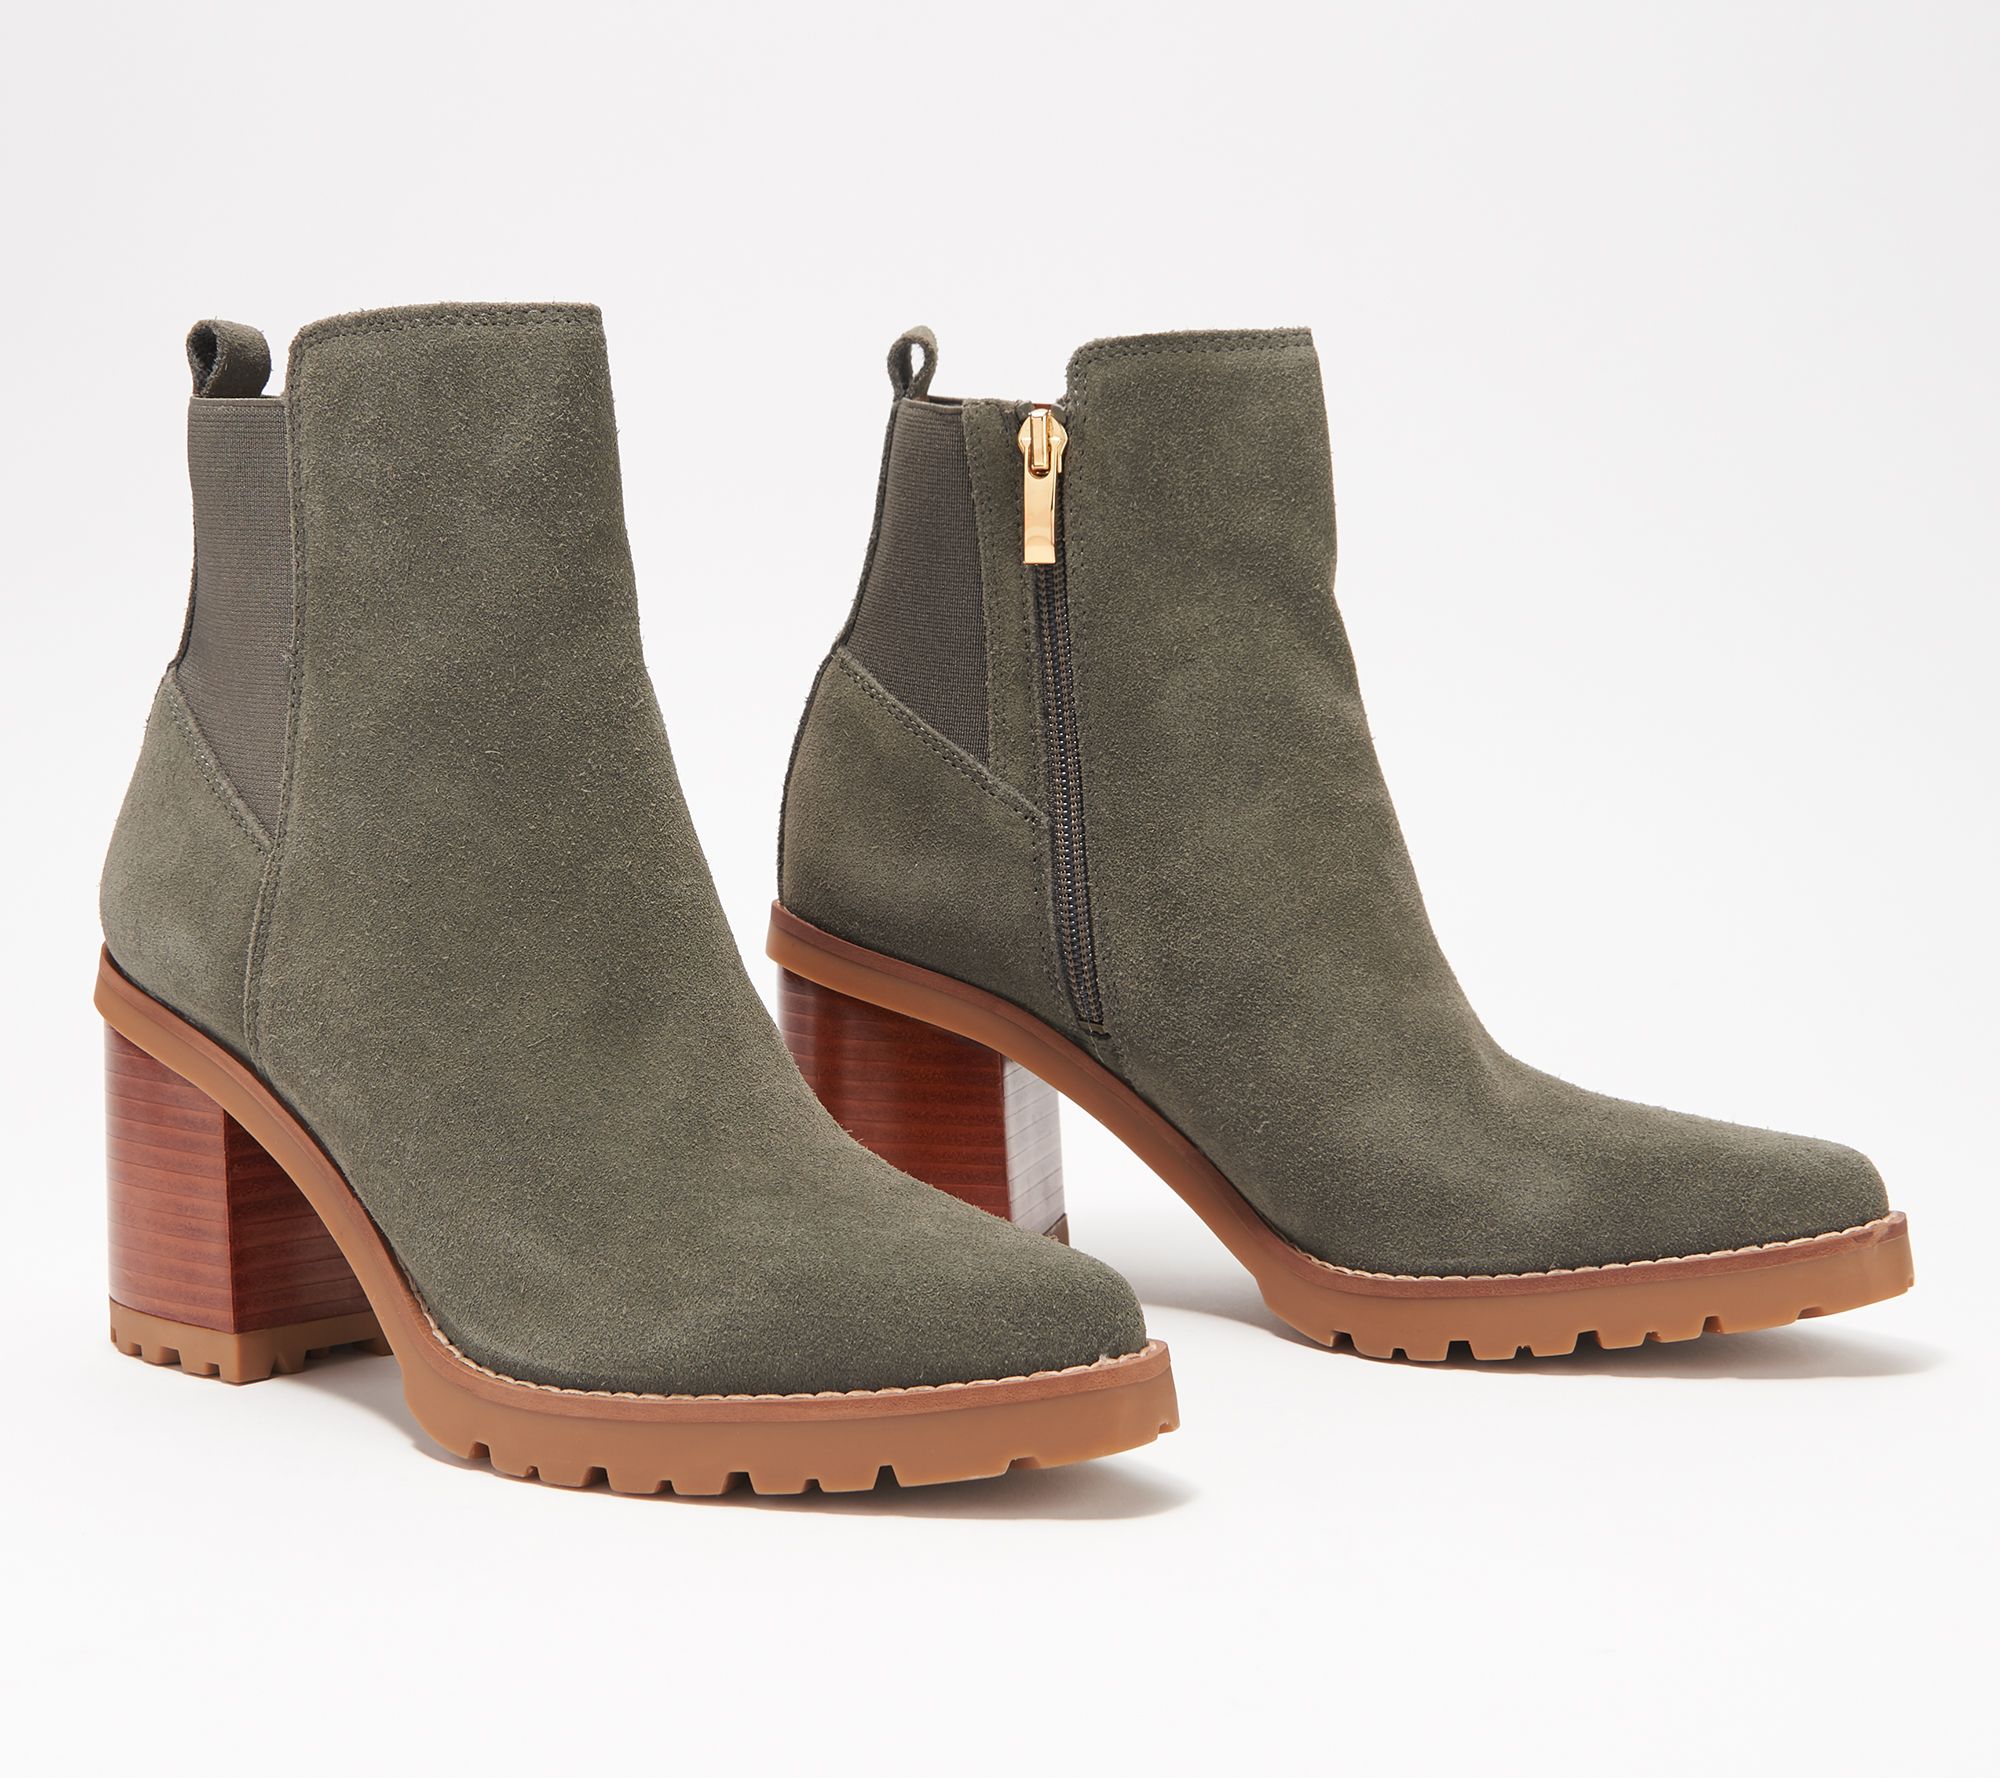 Franco Sarto Suede Ankle Boots - Tori 